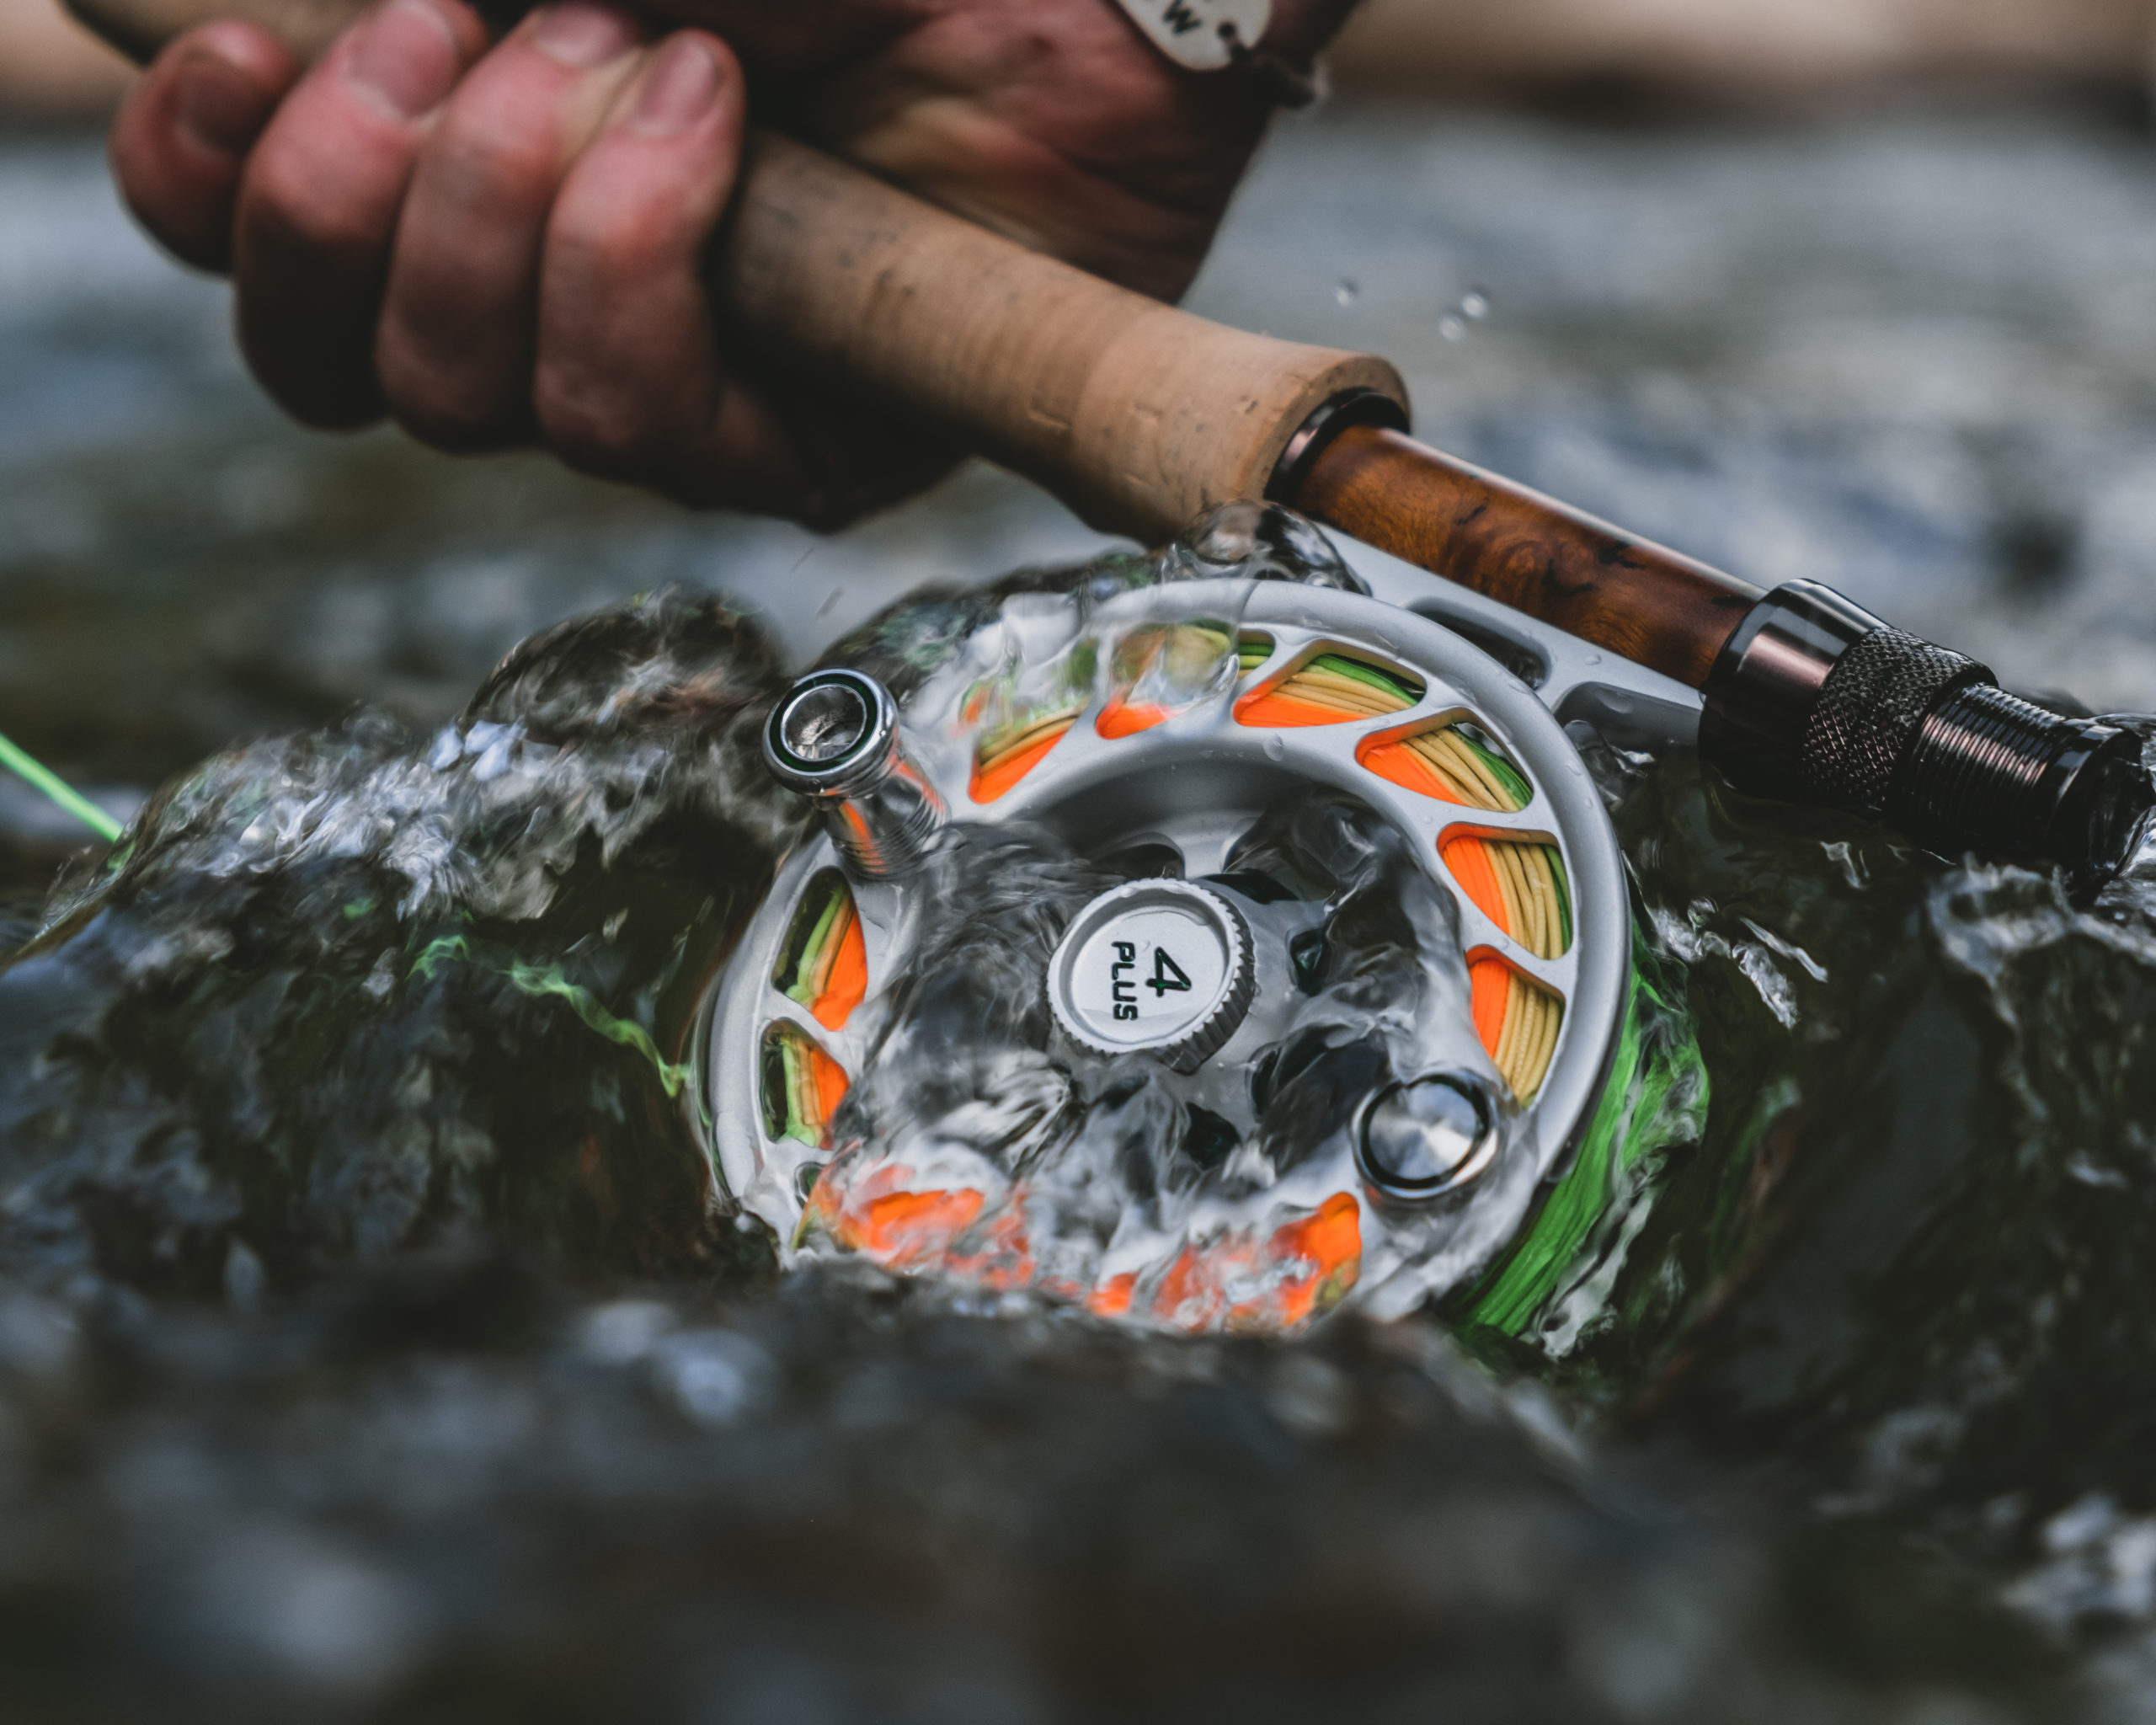 https://www.outdoorsfirst.com/wp-content/uploads/2022/06/reel-8425-scaled.jpg